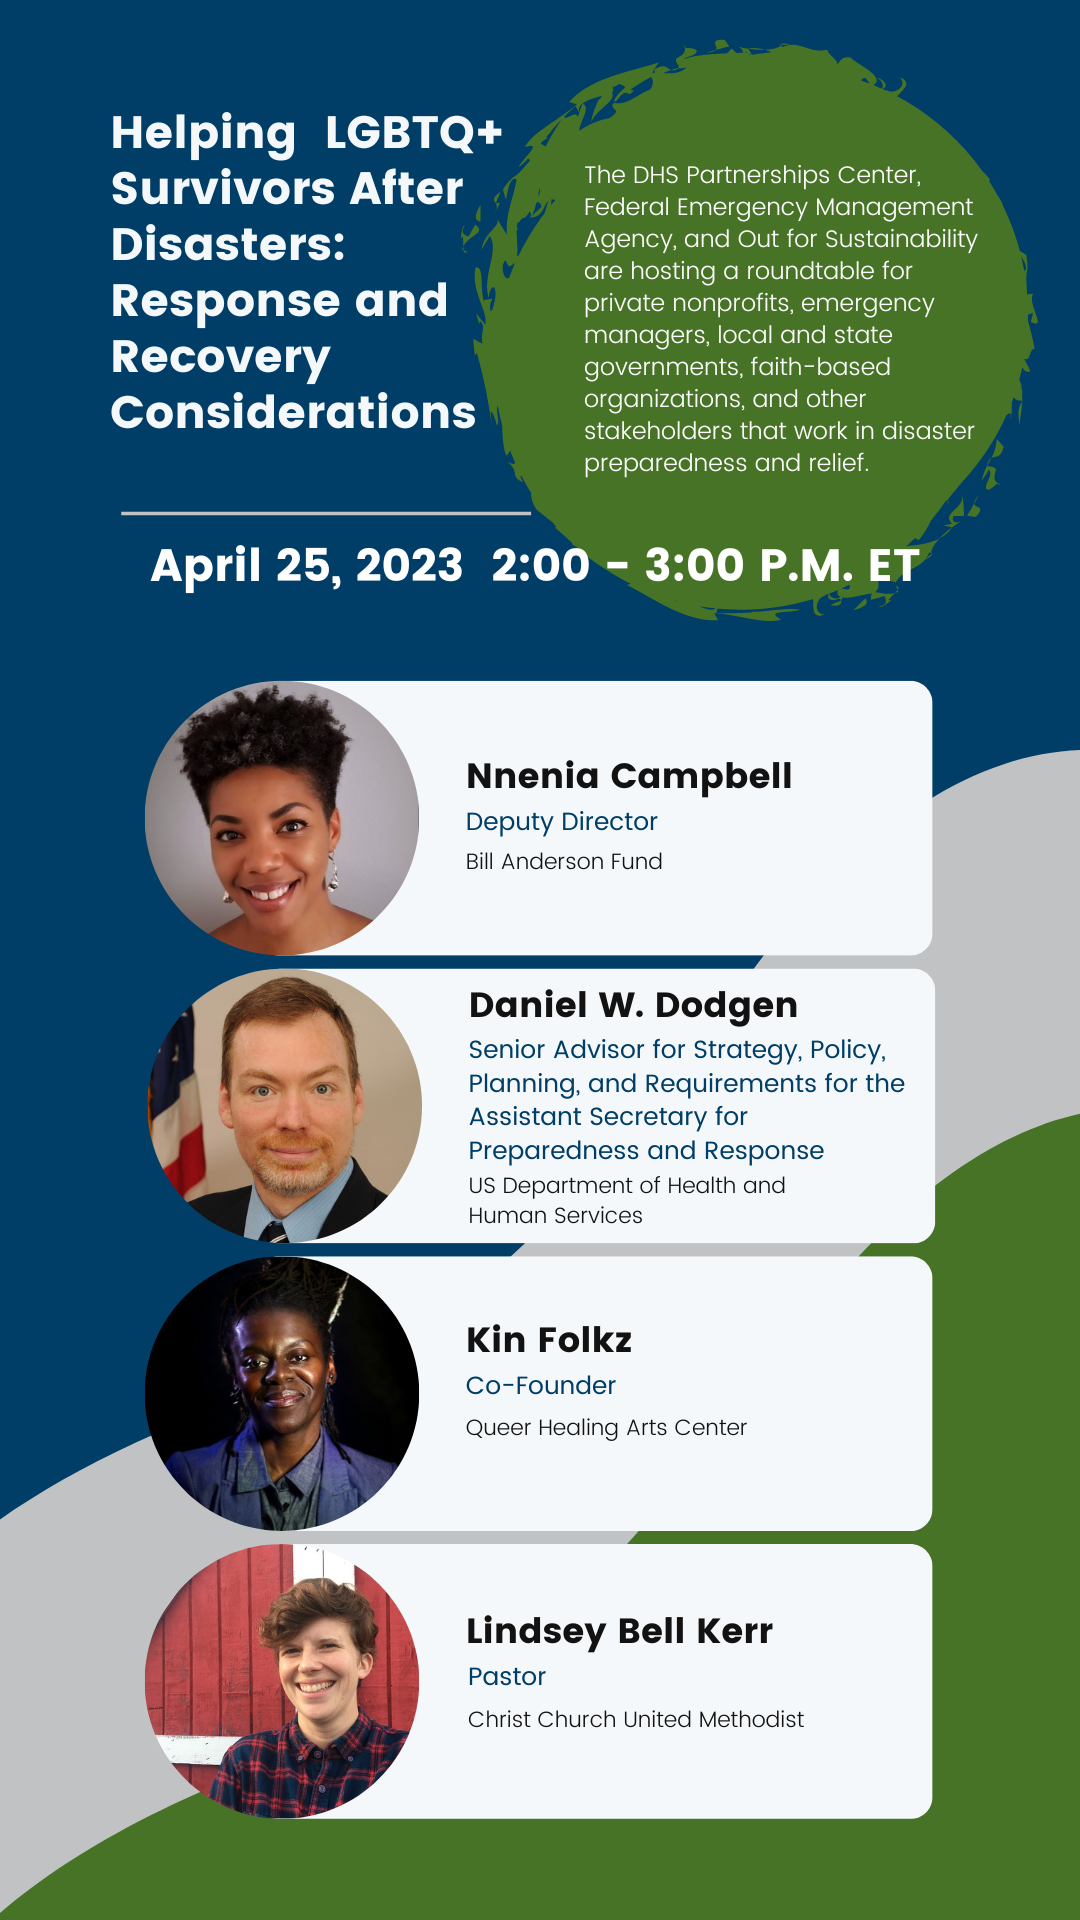 Helping  LGBTQ+ Survivors After Disasters: Response and Recovery Considerations Flyer with images and titles of speakers, April 25, 2023  2:00 - 3:00 P.M. ET, Nnenia Campbell, Daniel W. Dodgen, Kin Folkz, Lindsey Bell Kerr